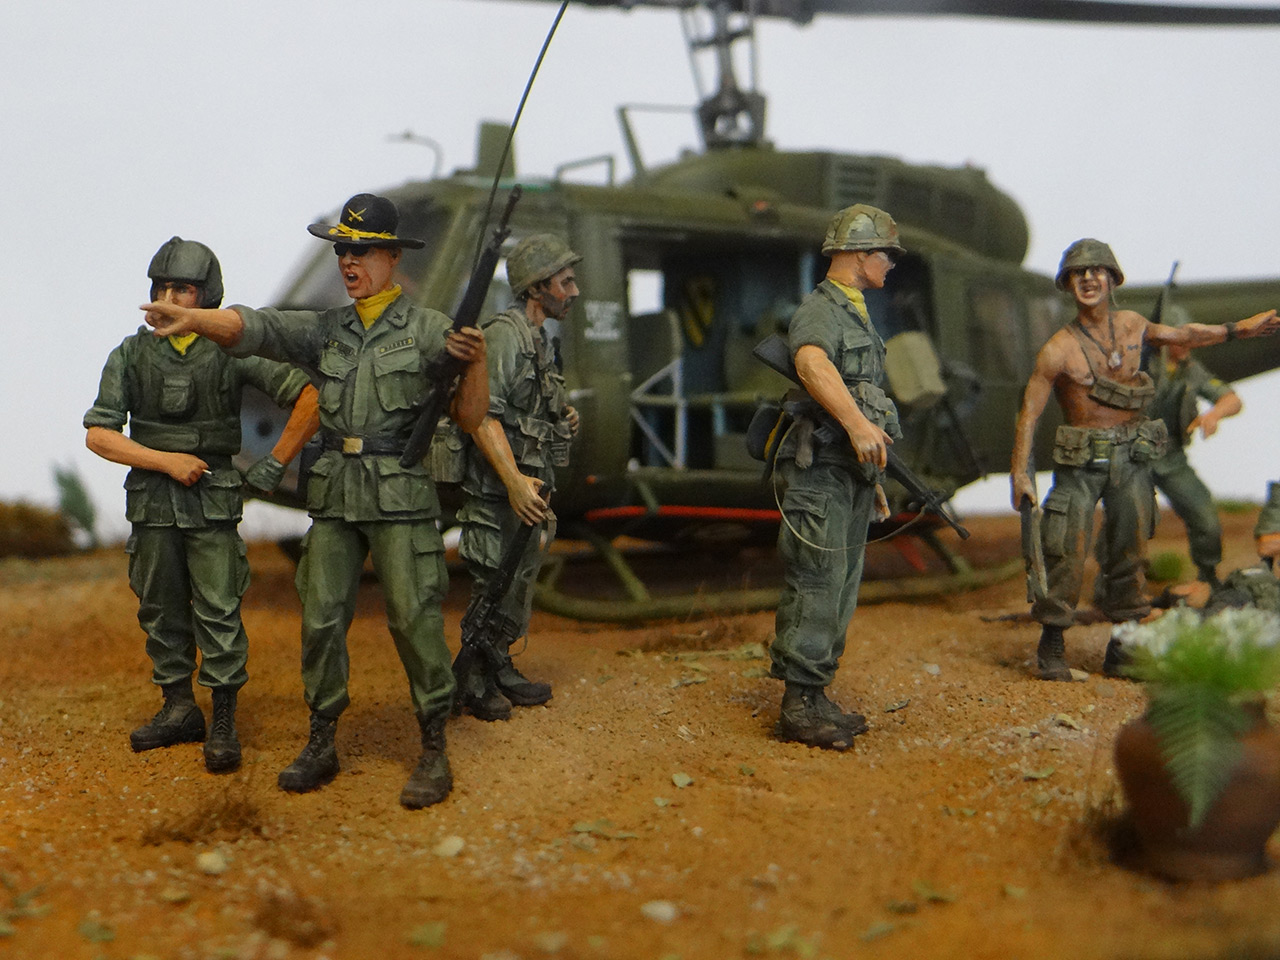 Dioramas and Vignettes: Death from Above, photo #8